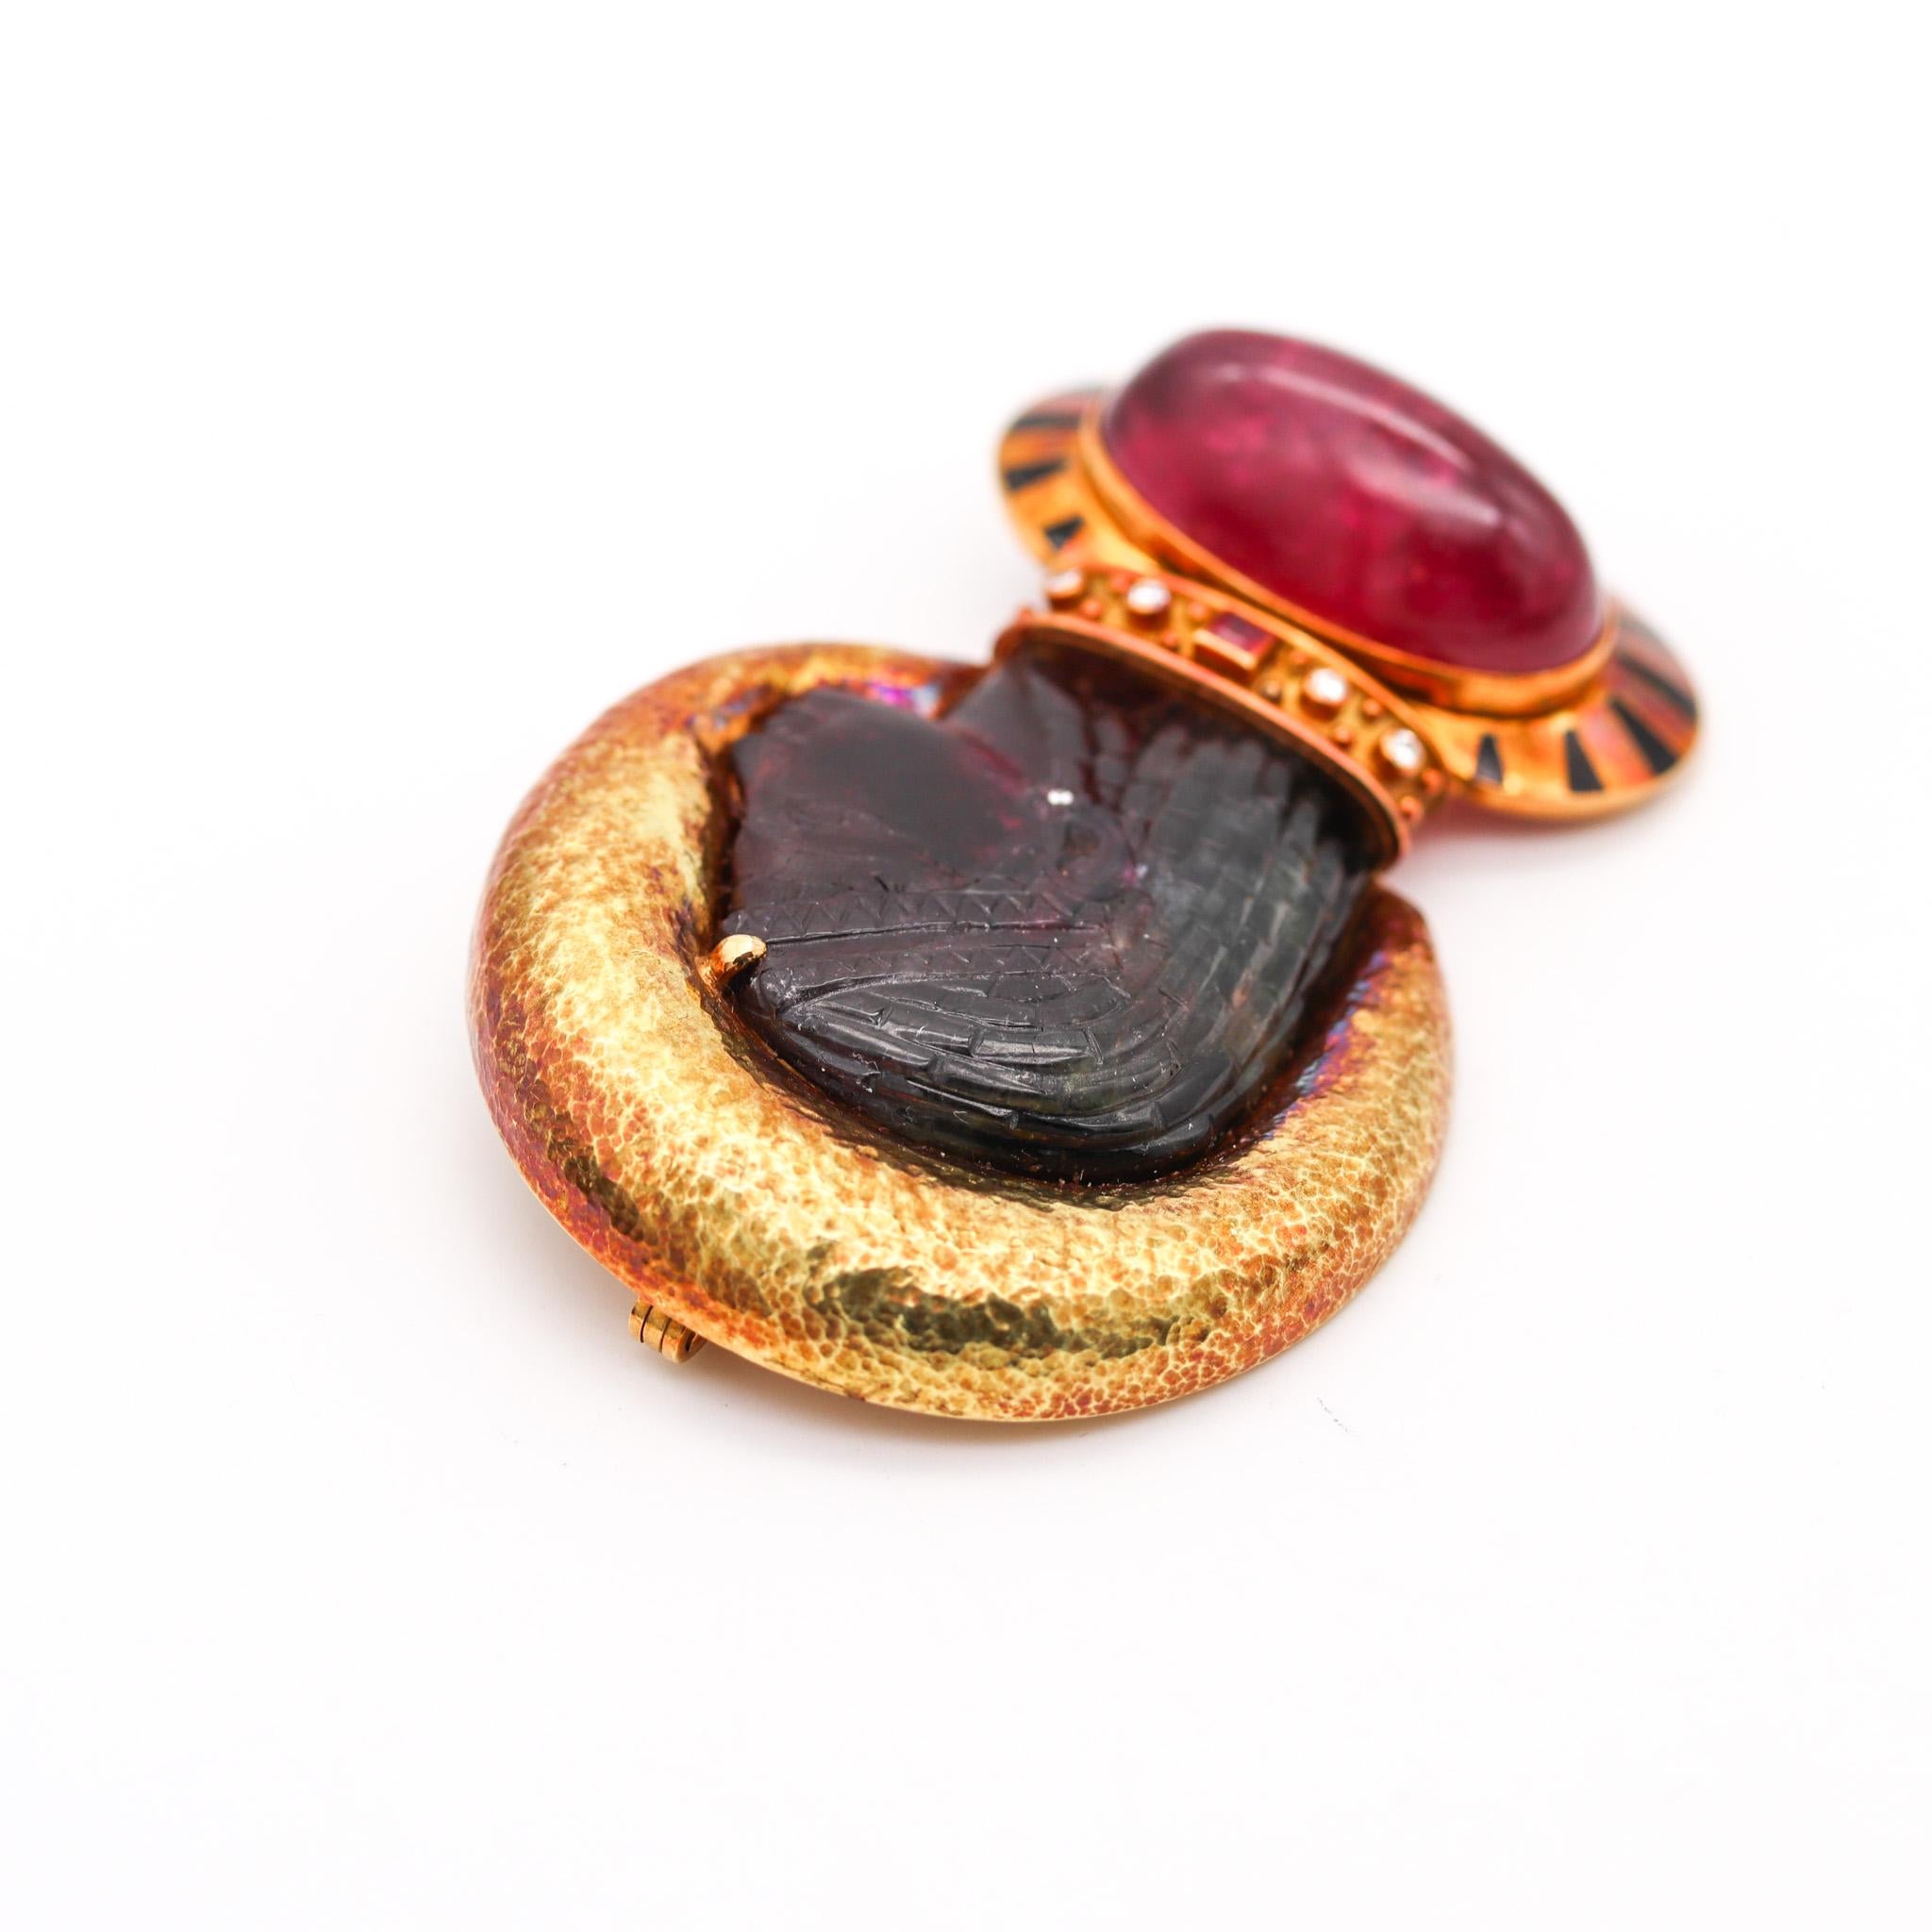 Egyptian Revival Elizabeth Gage 1990 London Enameled Pendant Brooch In 18Kt Gold With Tourmalines For Sale